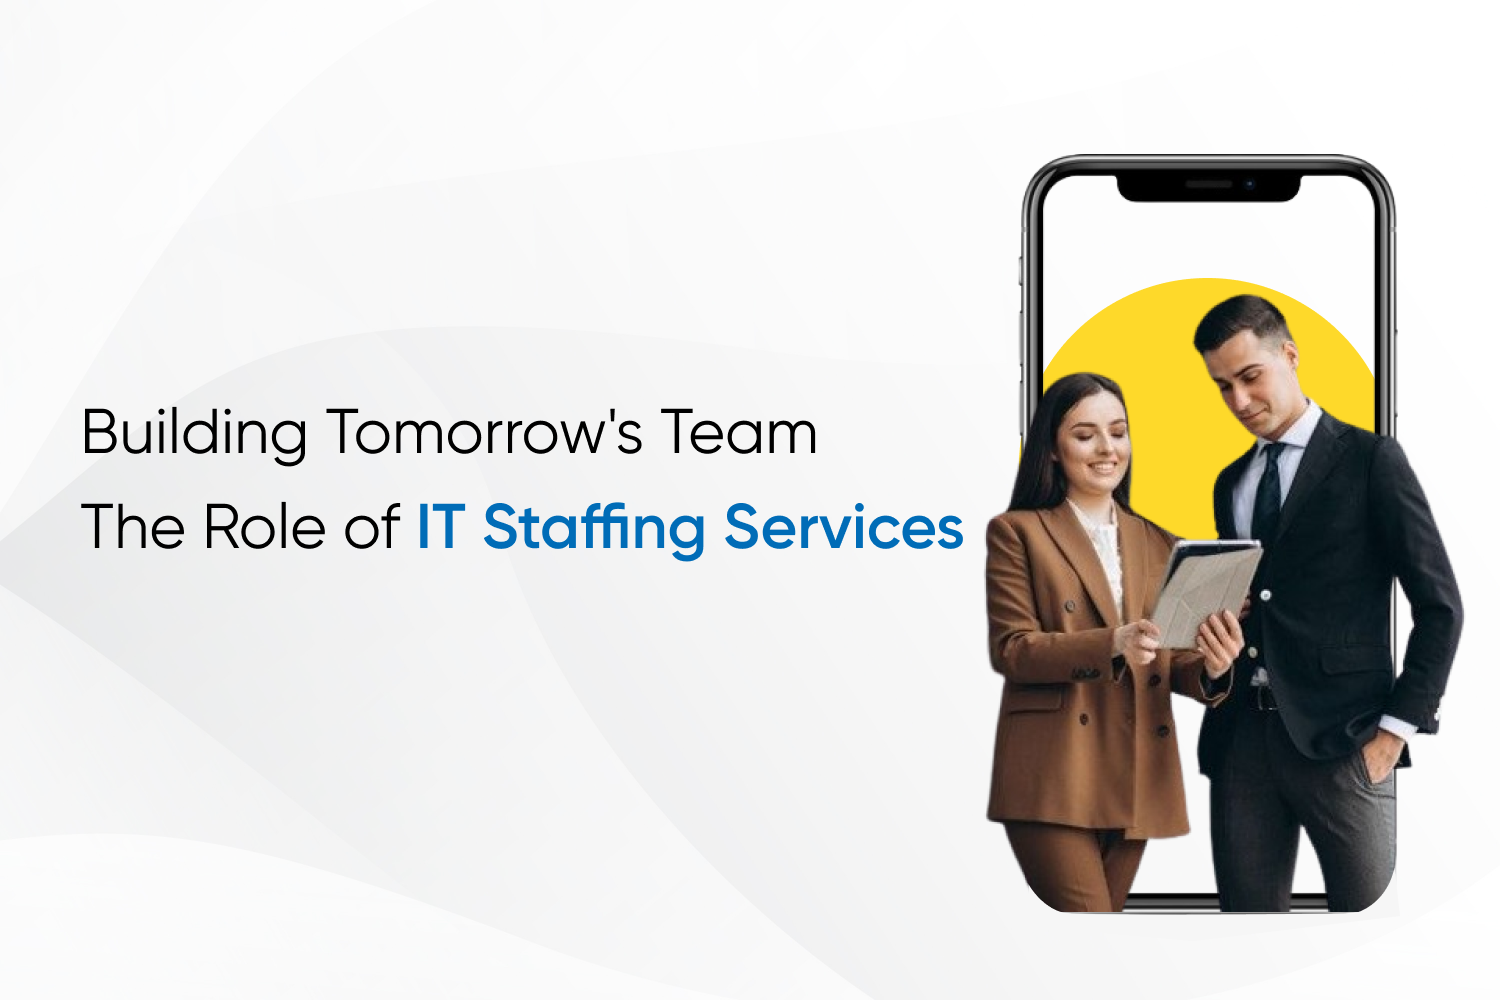 Building Tomorrow's Team The Role of IT Staffing Services